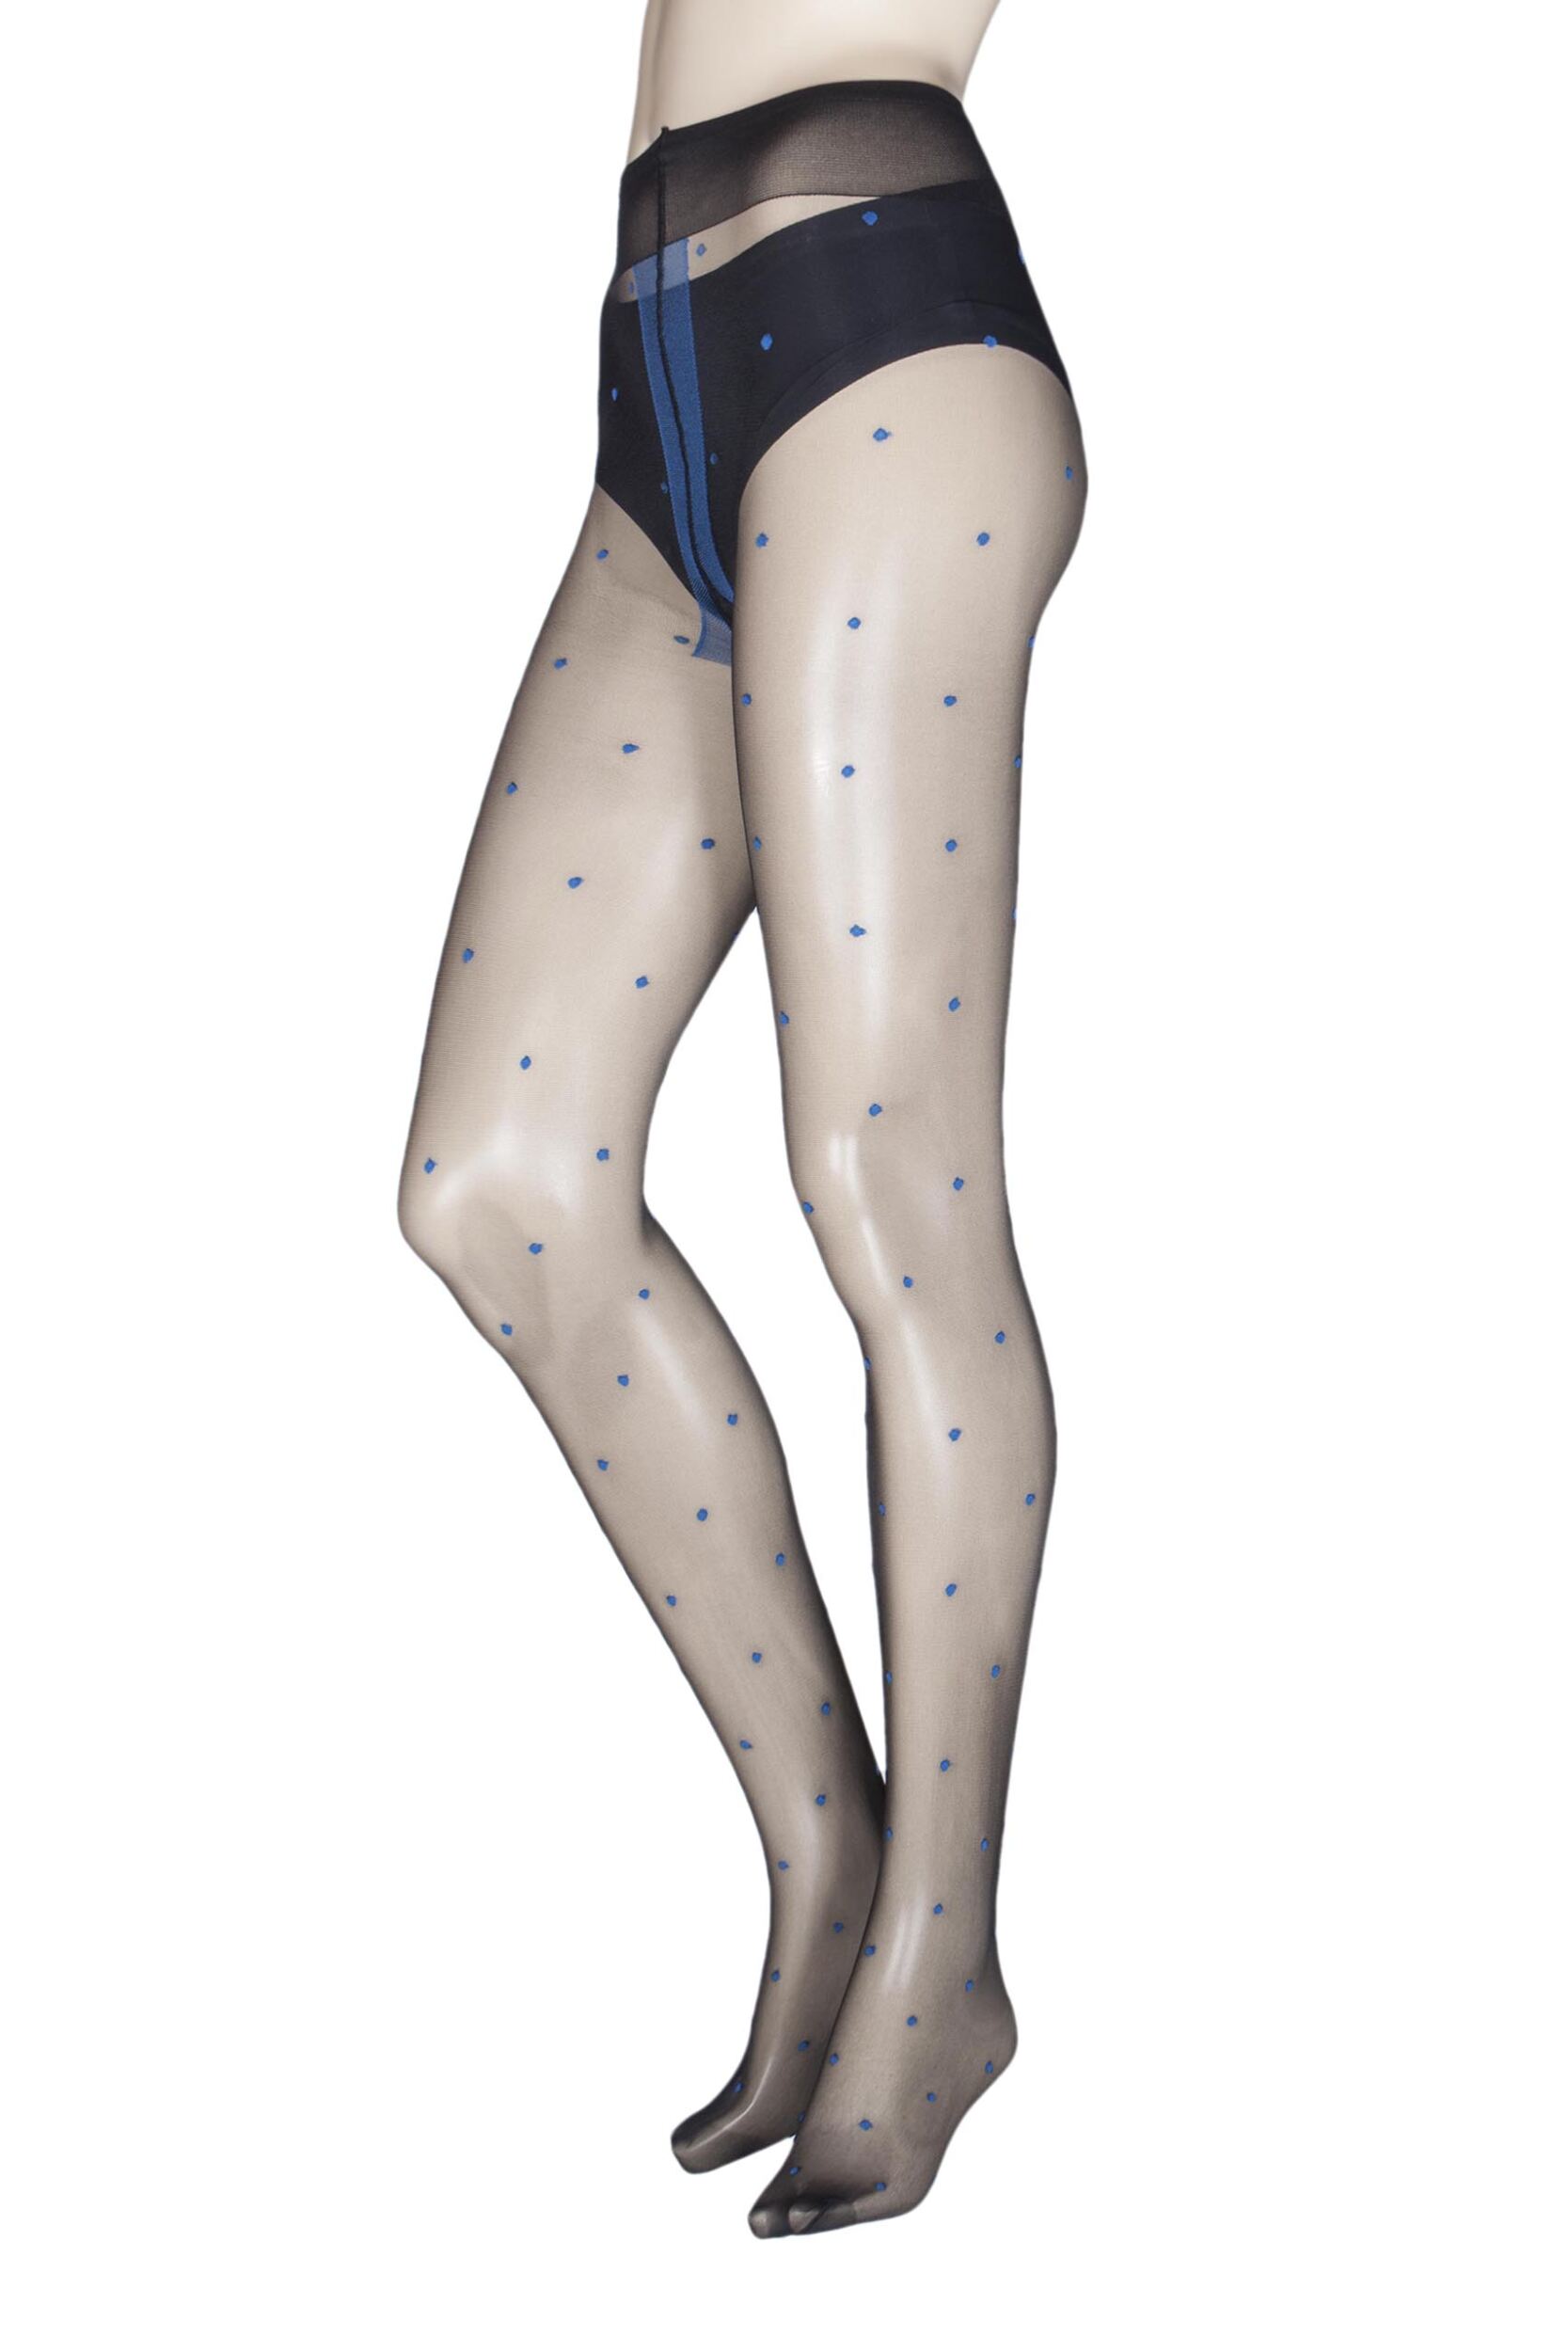 1 Pair Blue Anguria Spotted Tights Ladies Extra Large - Trasparenze